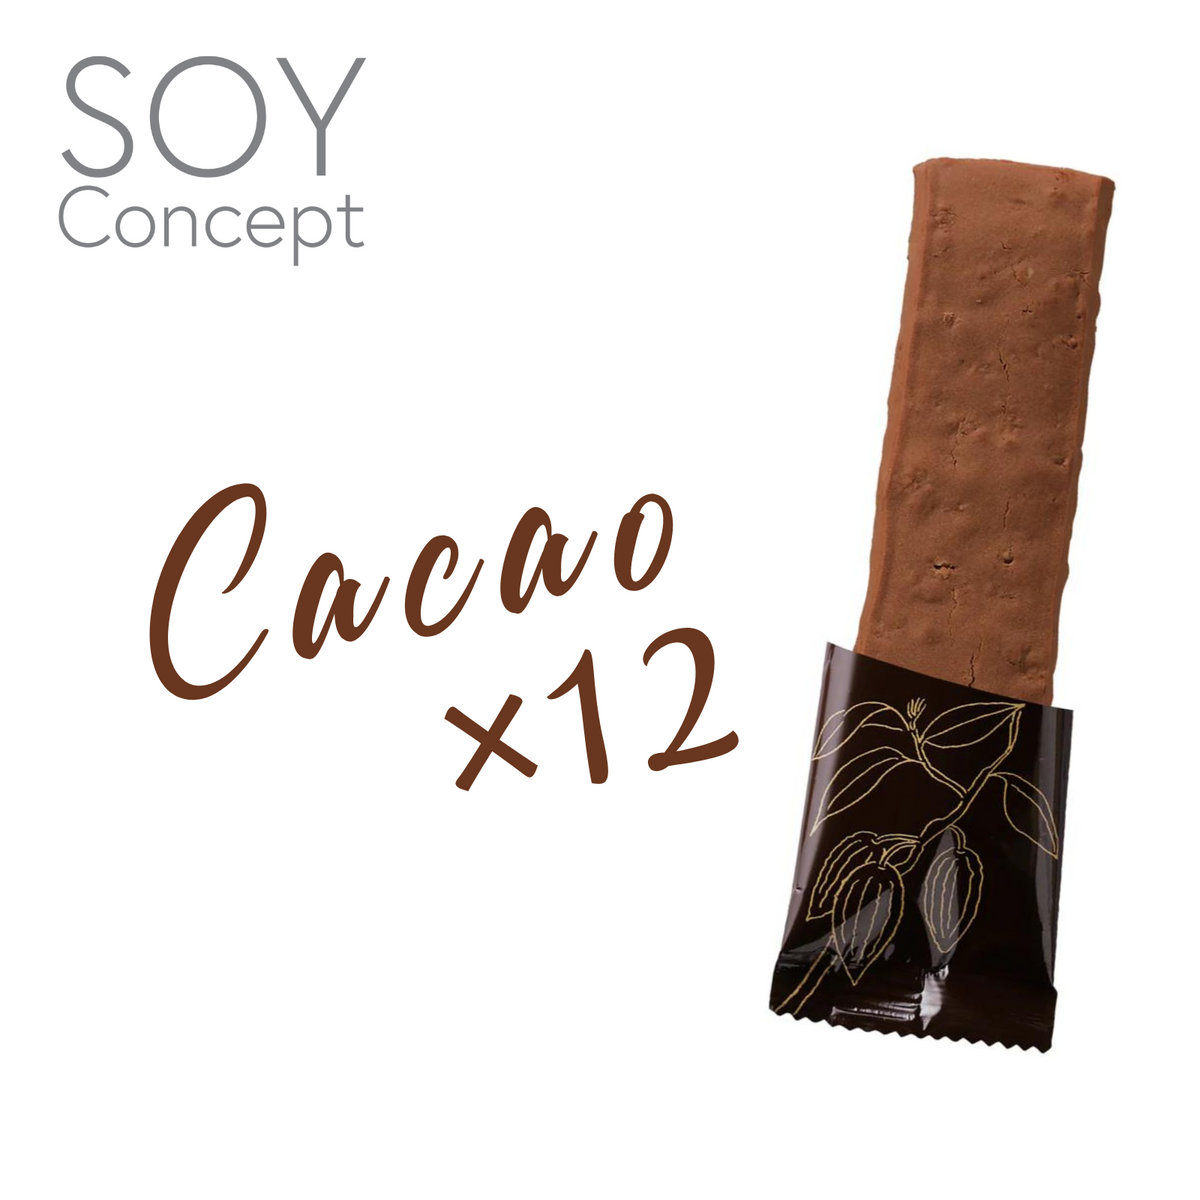 SOY Concept Cacao カカオ（1箱12本）